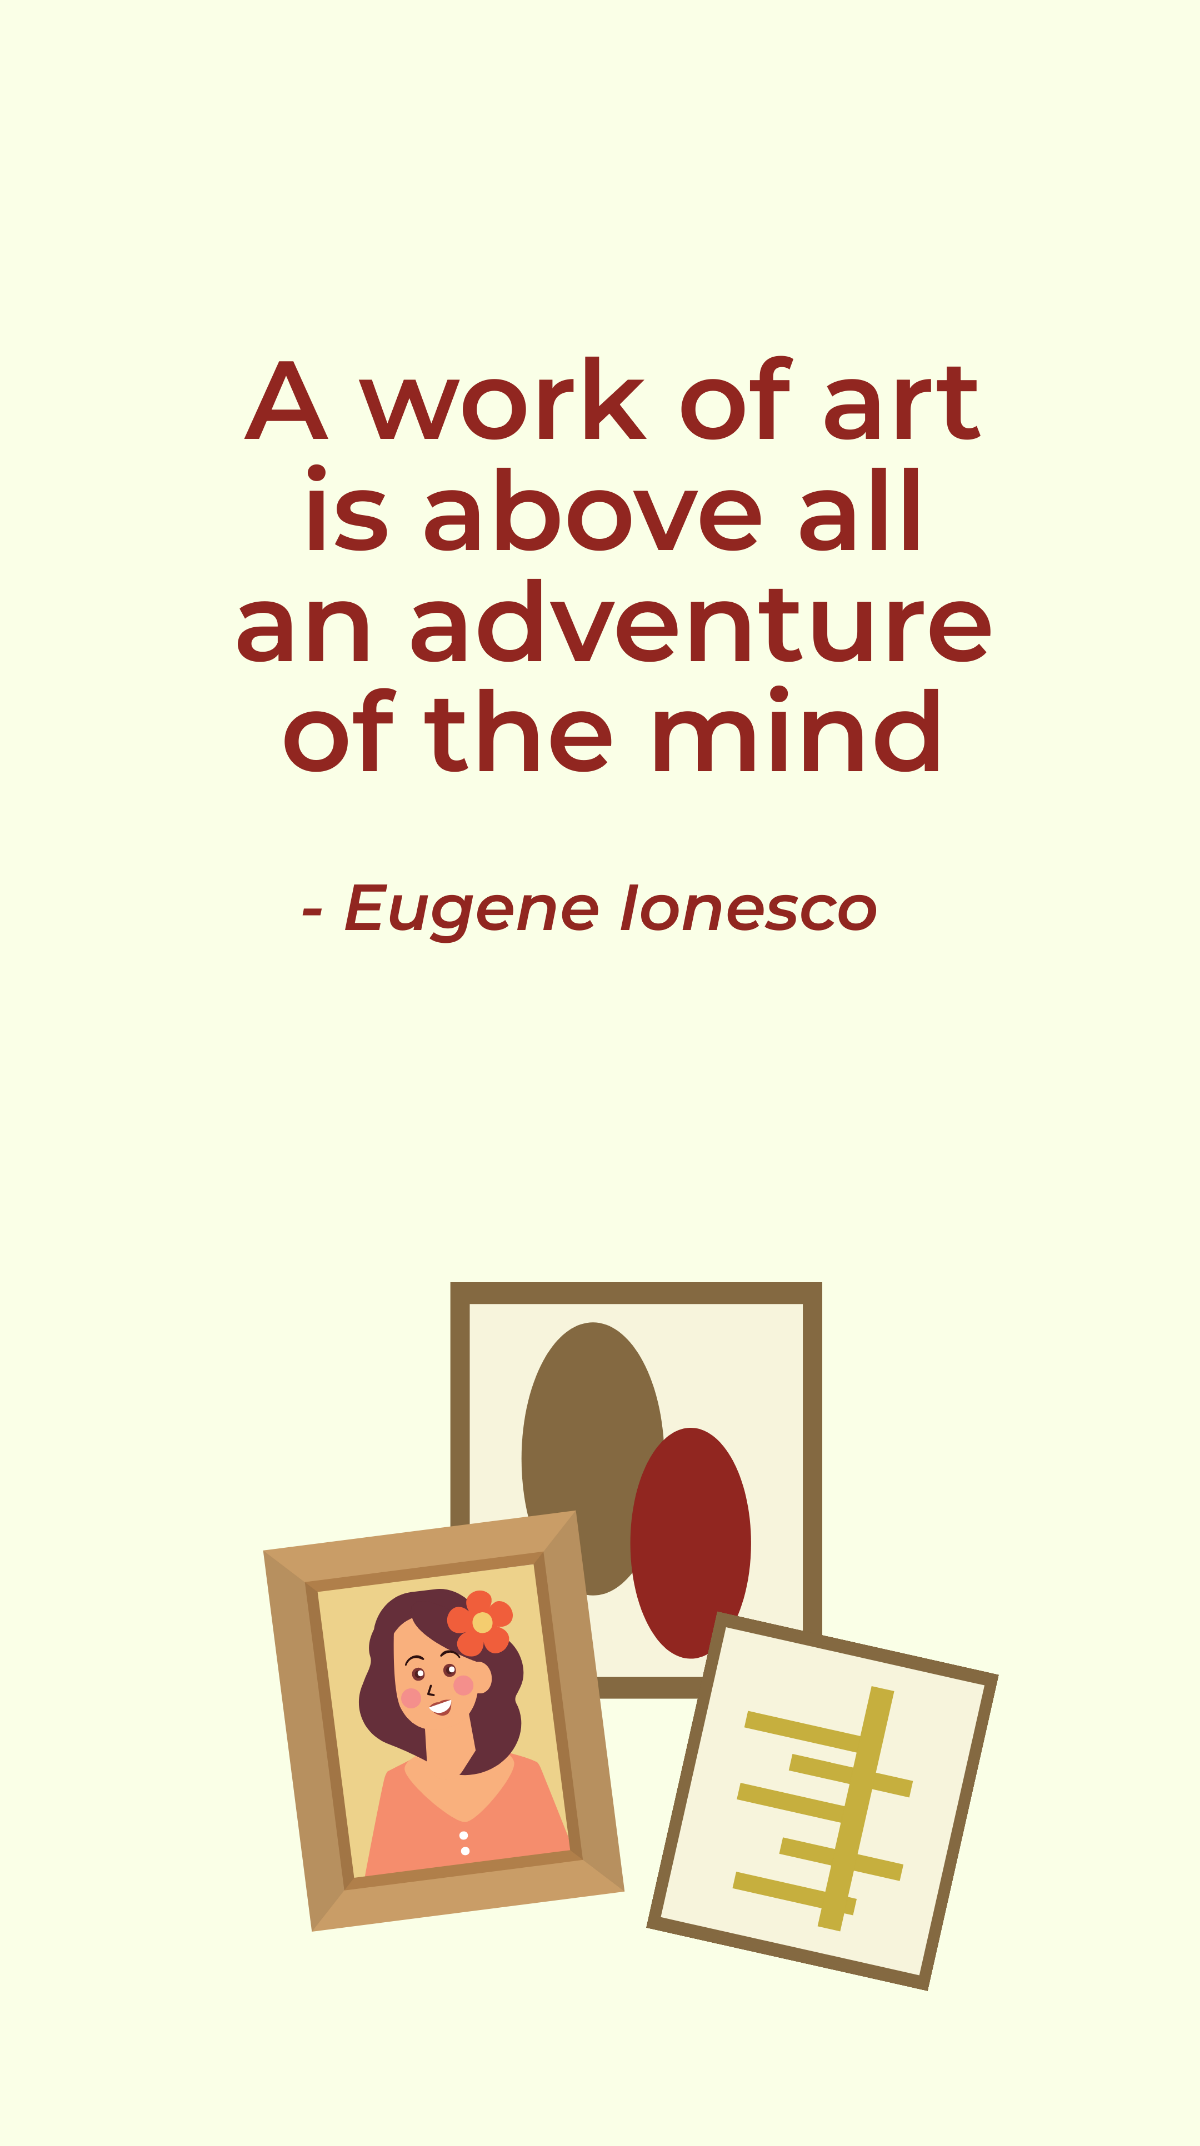 Free Eugene Ionesco - A work of art is above all an adventure of the mind Template